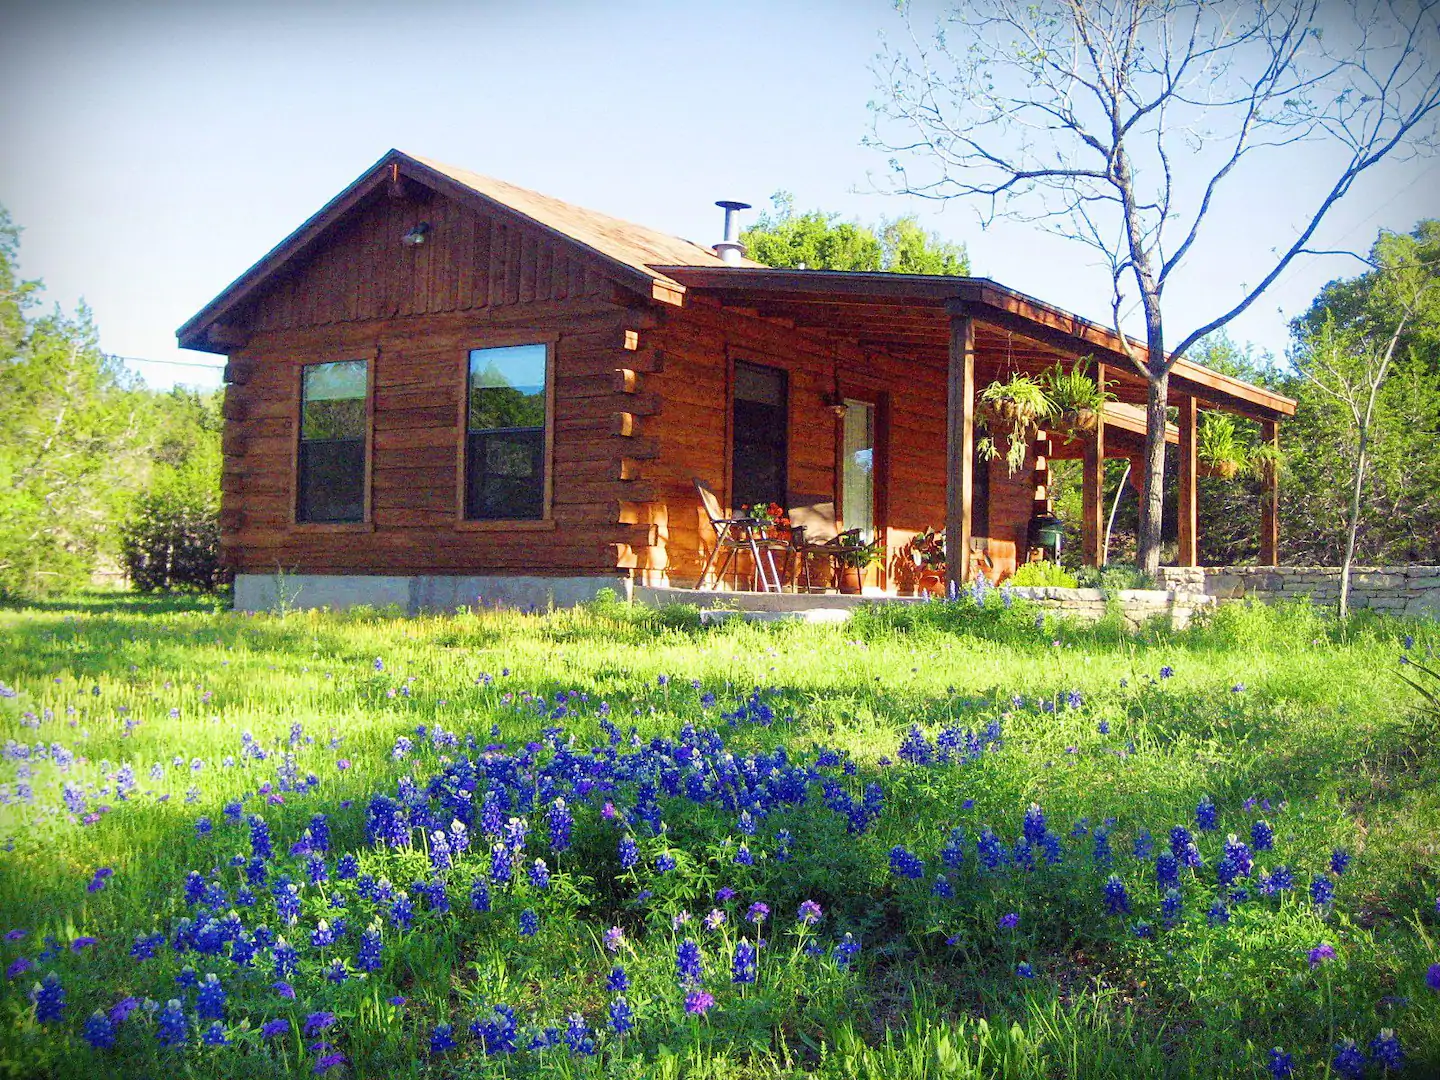 A beautiful Texas log cabin surrounded by green grass with purple flowers in the foreground.